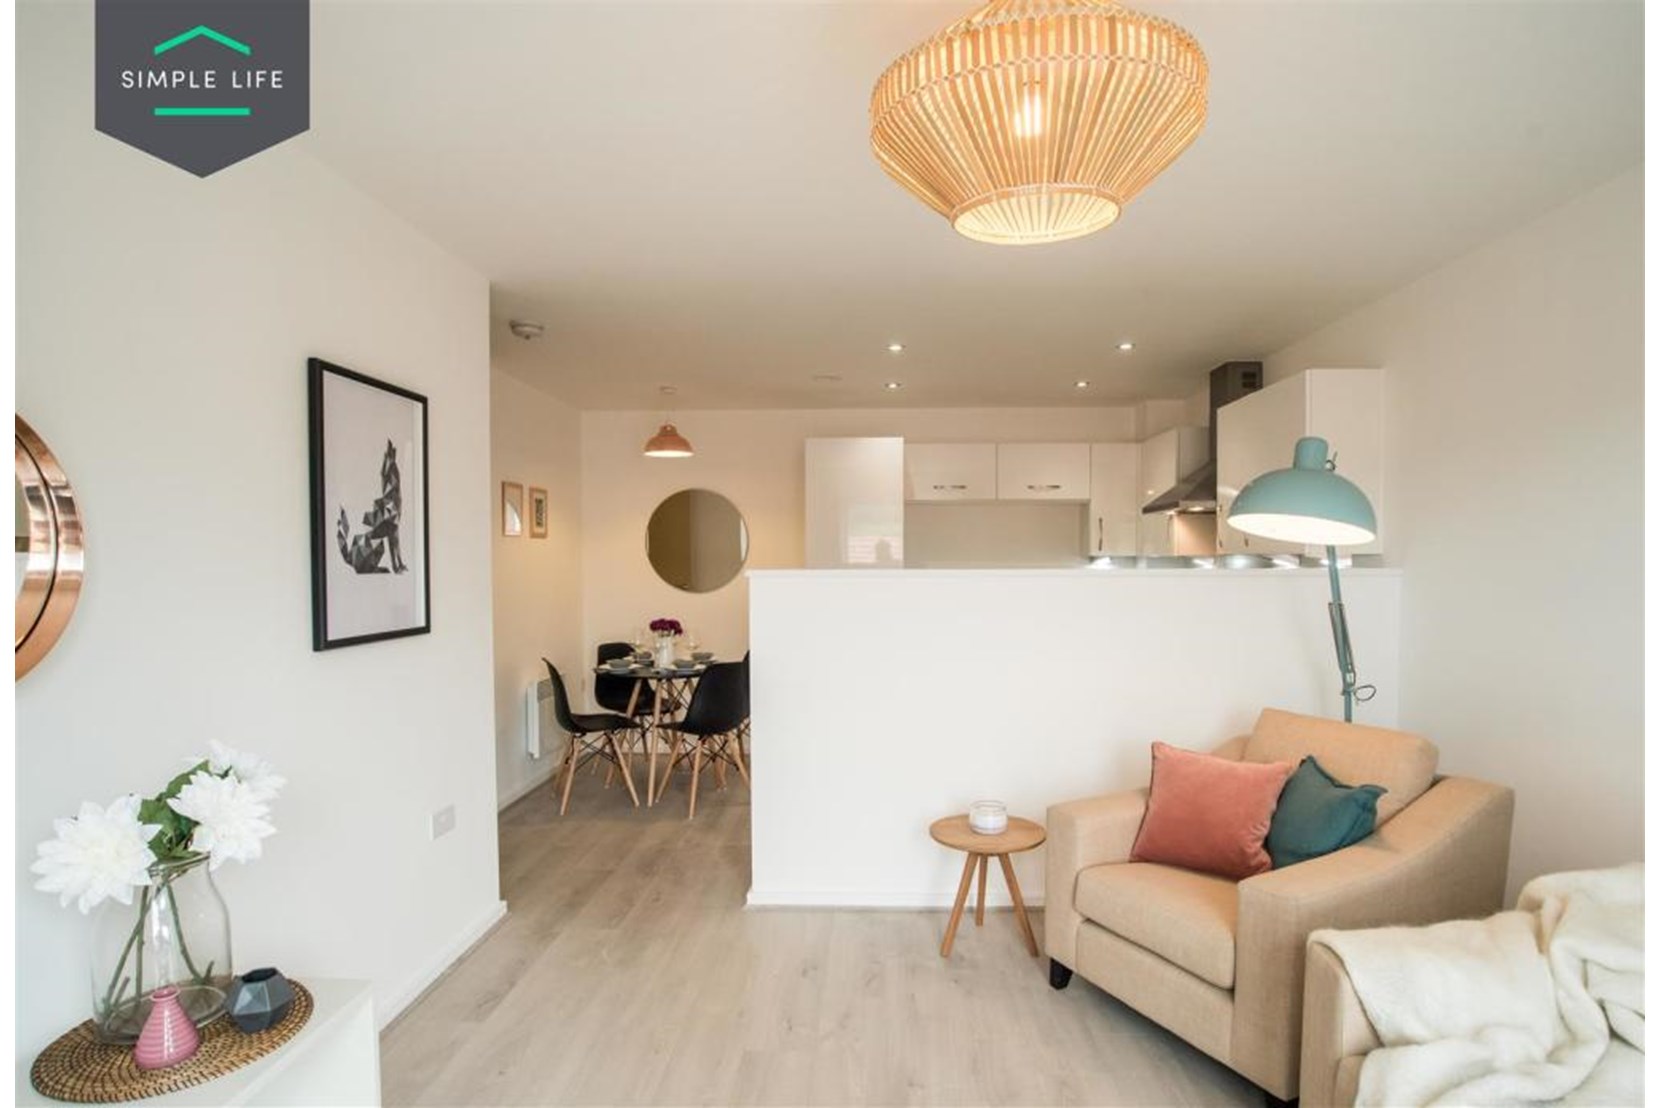 Apartments by Simple Life to Rent, The Rowan, 2 bedroom apartment, living-dining area